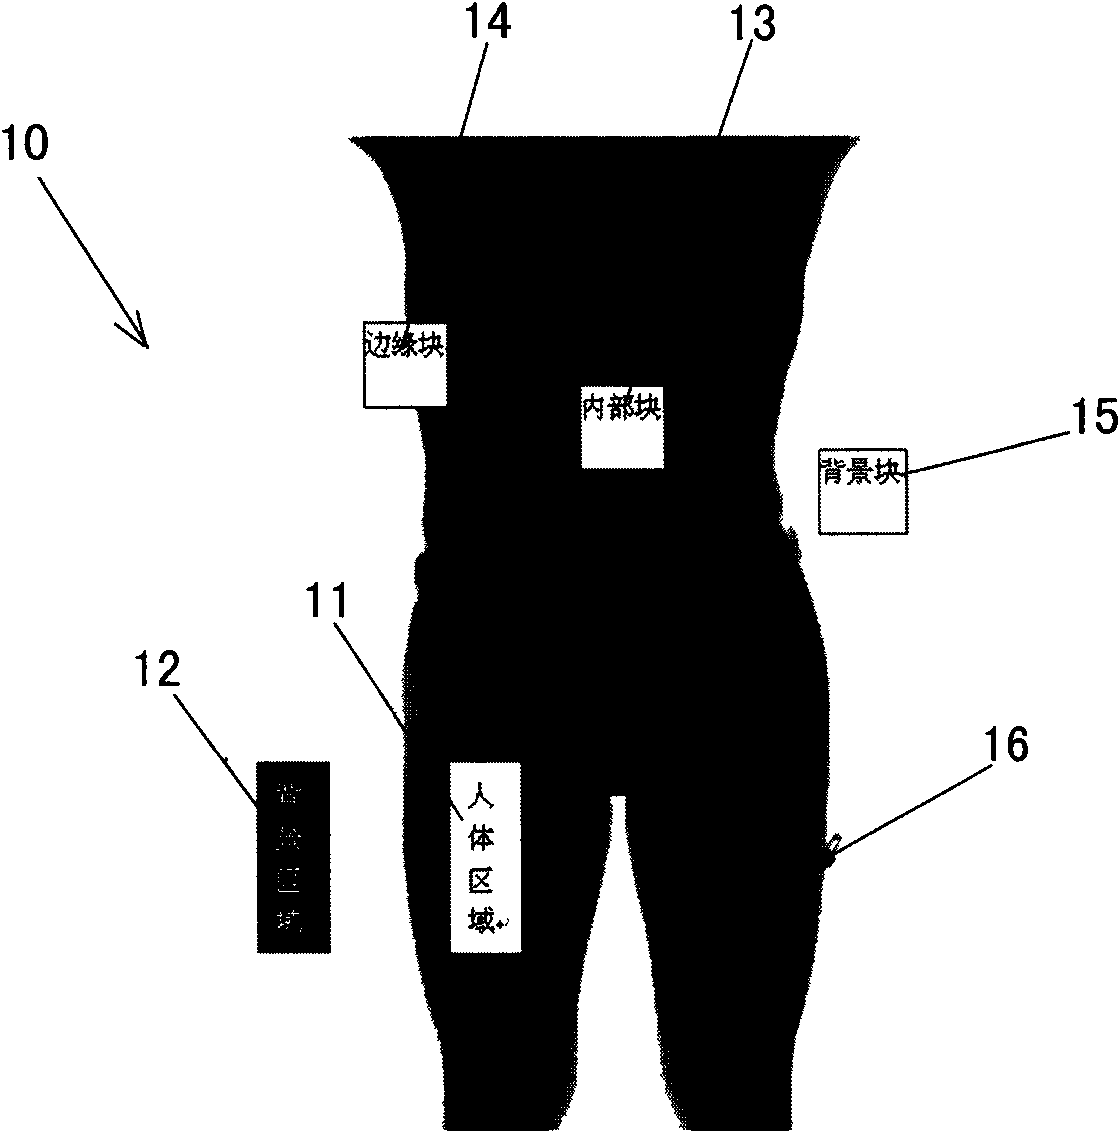 Image enhancing method for security inspection system